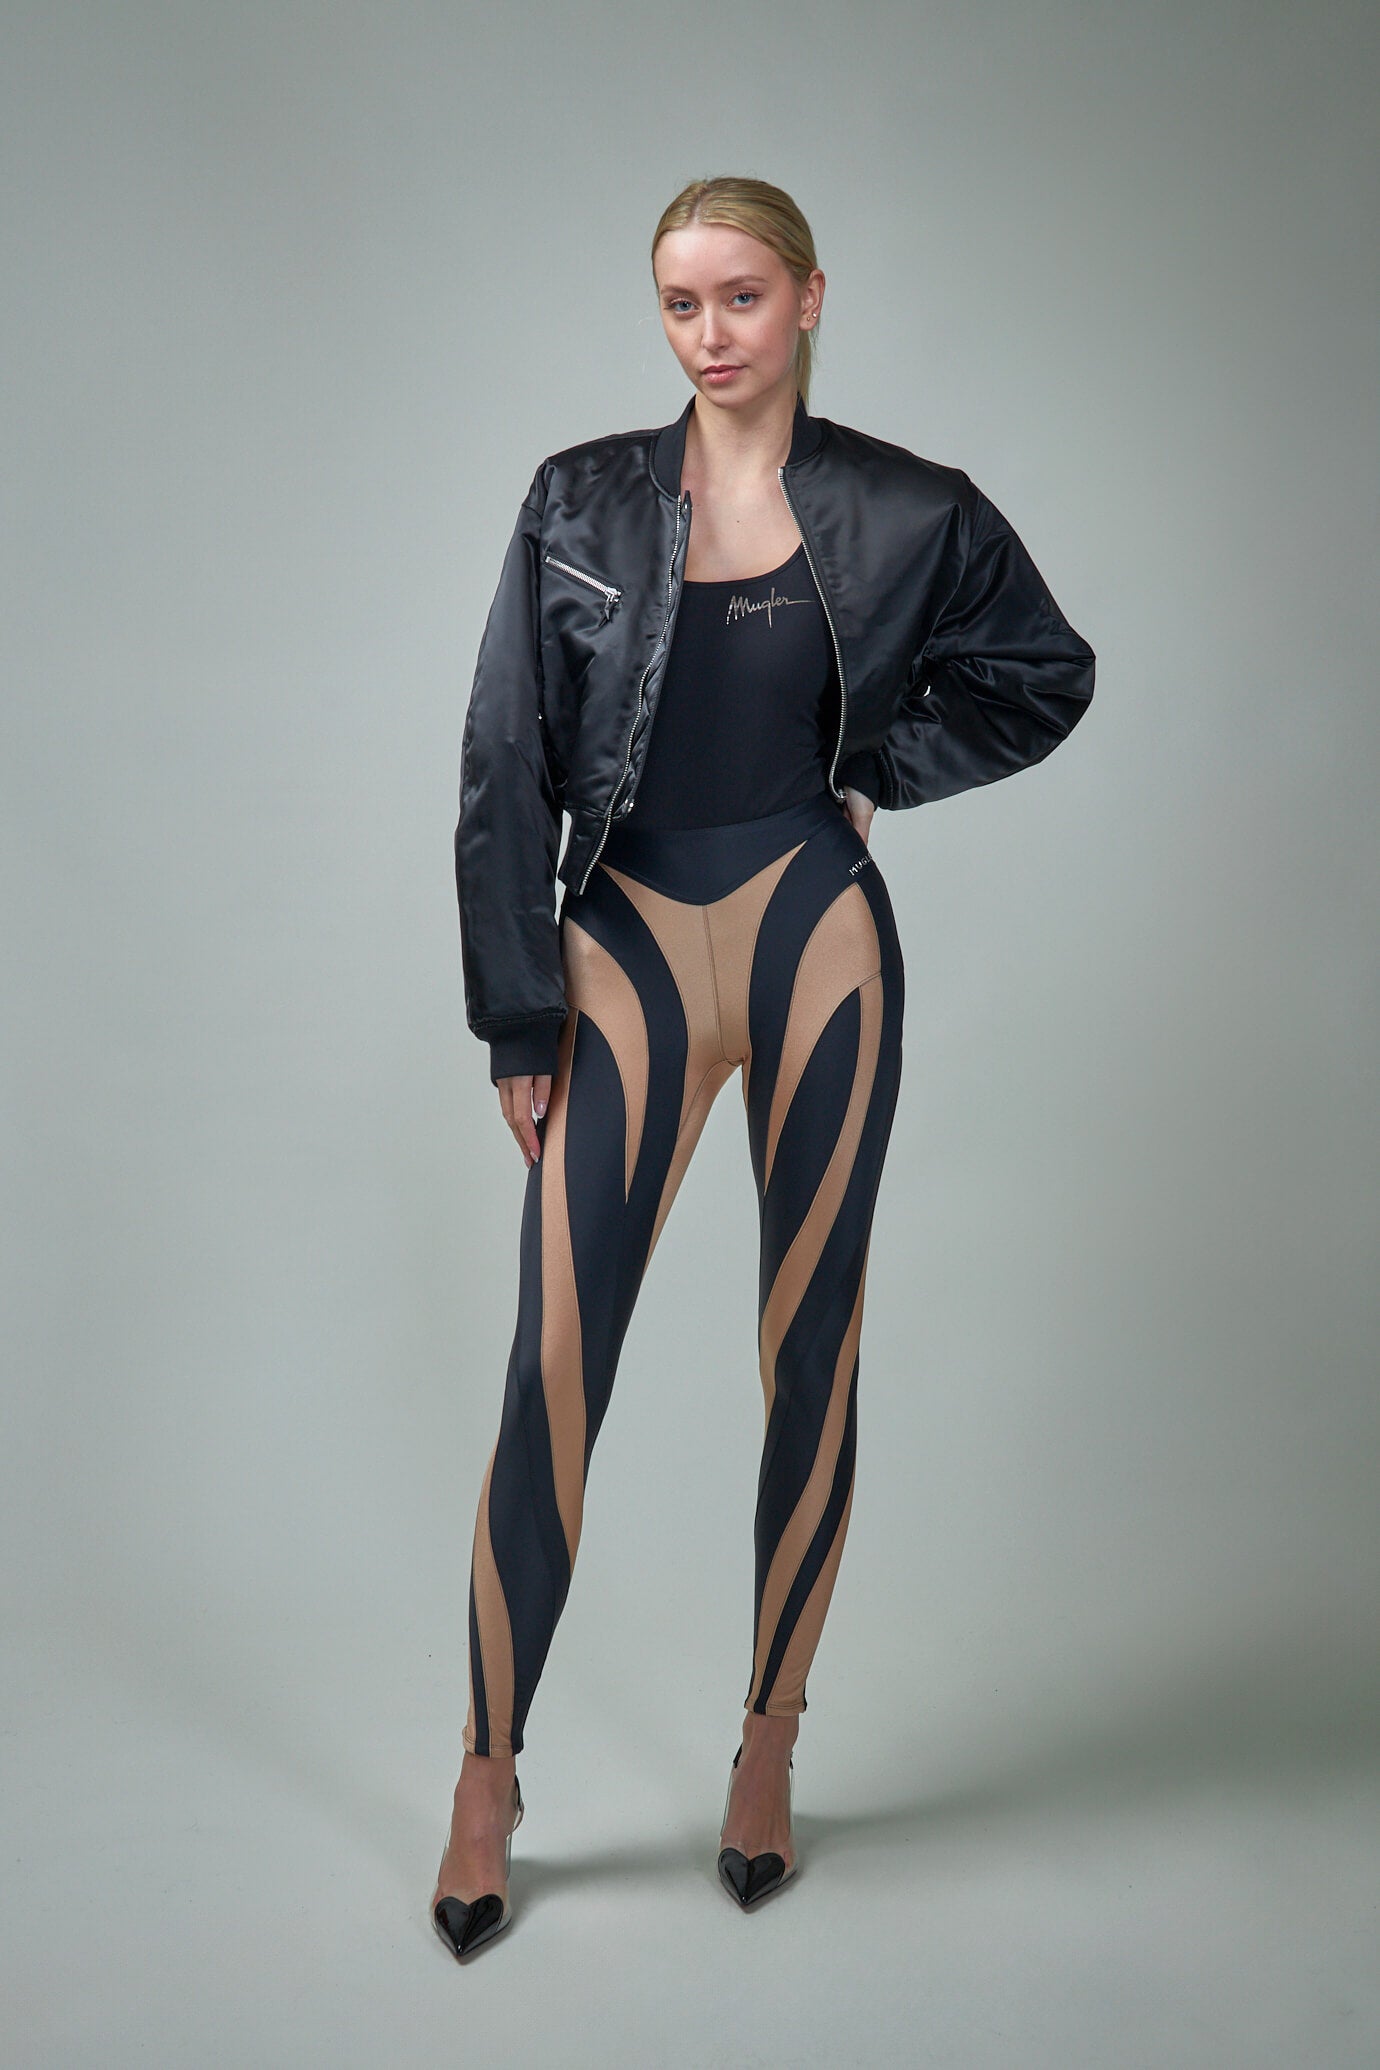 MUGLER - Glossy Sheer-Panelled Spiral Leggings  HBX - Globally Curated  Fashion and Lifestyle by Hypebeast